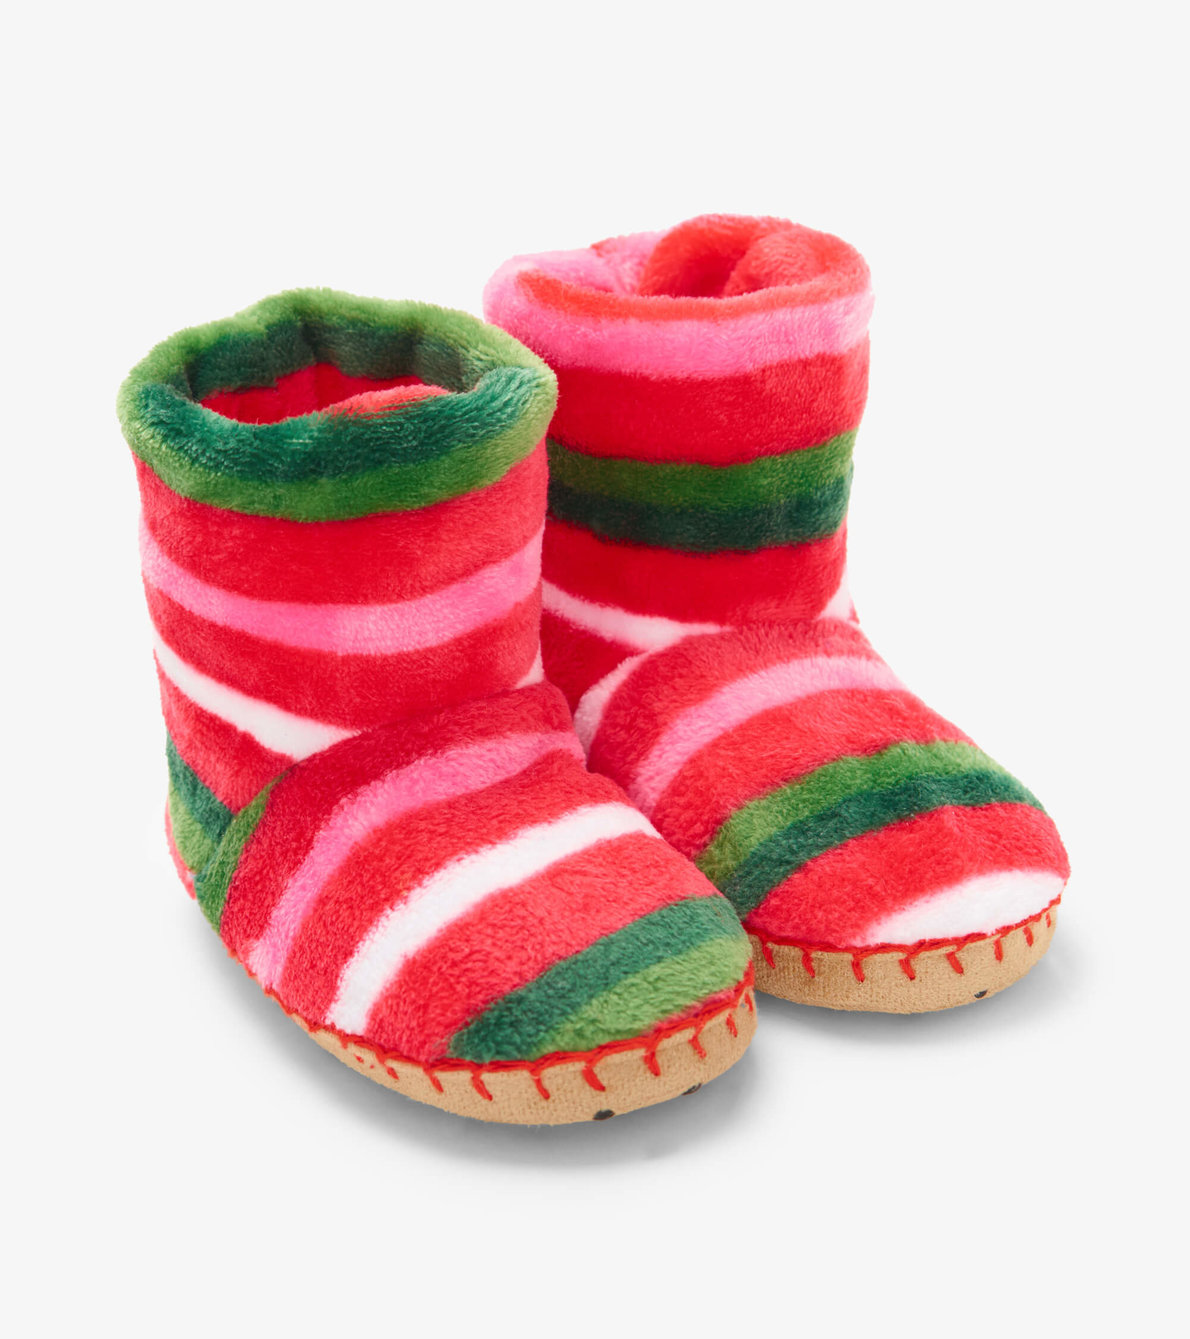 View larger image of Candy Cane Stripes Fleece Slippers